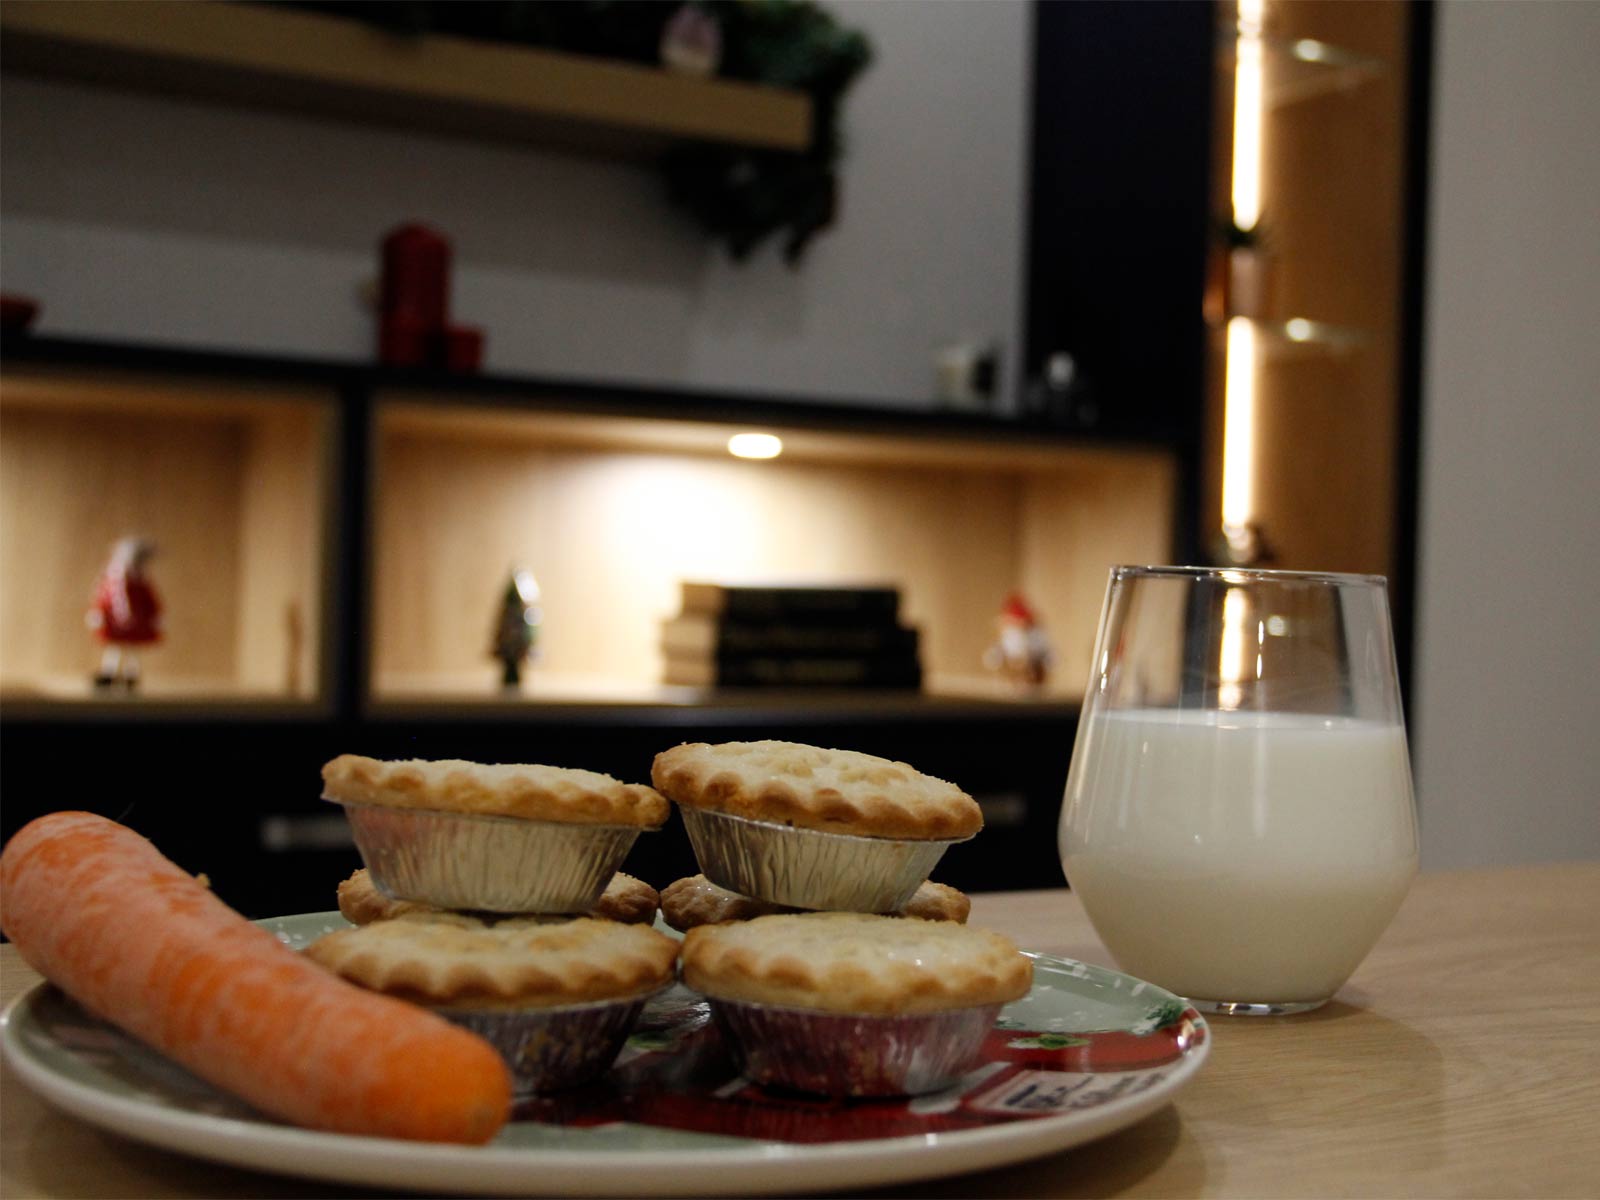 A carrot and mine pies on a plate alongside a glass of milk